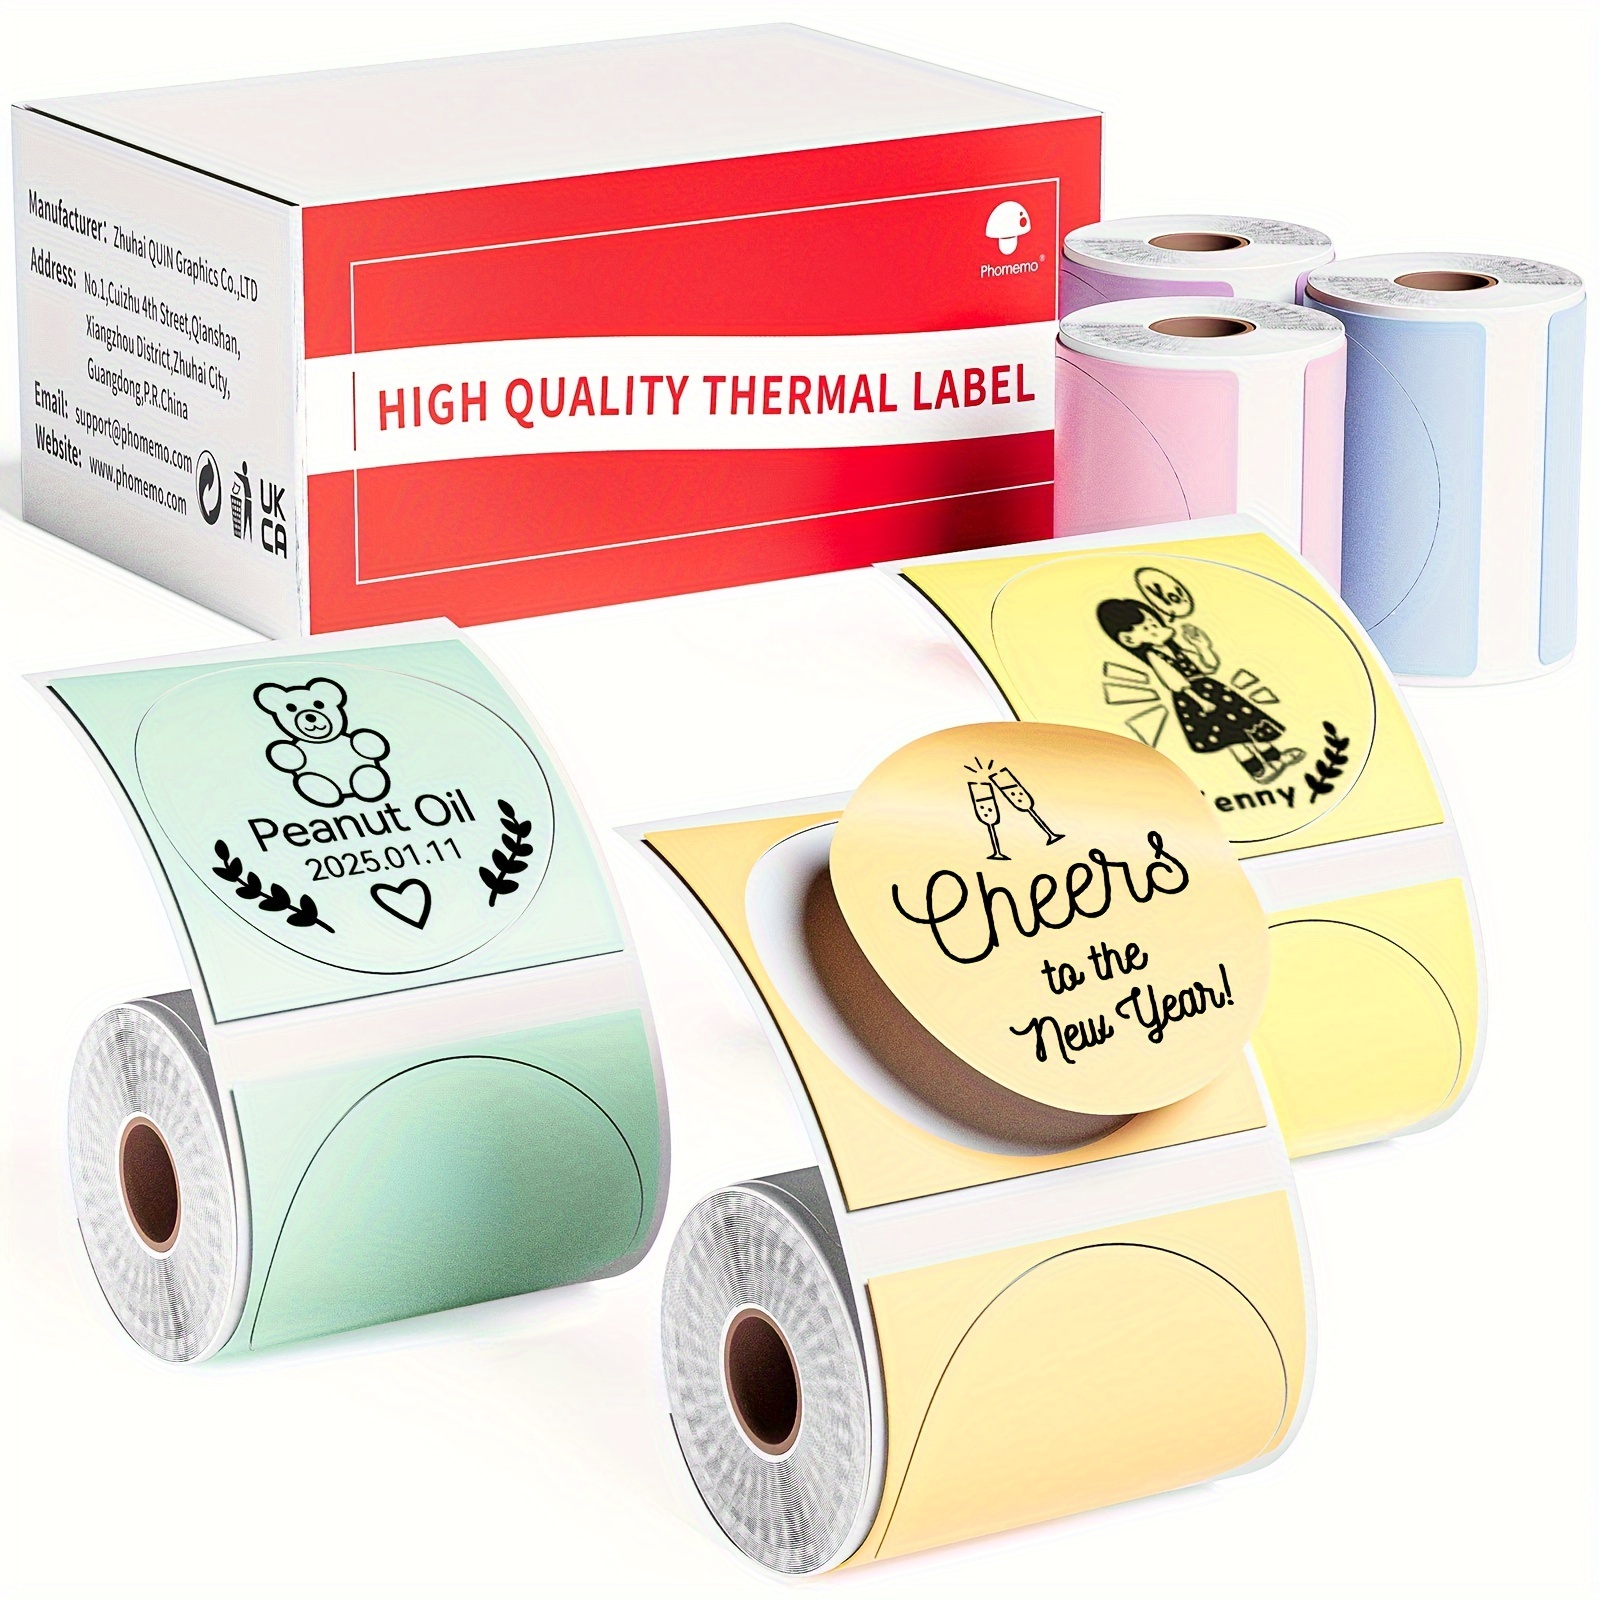 

Phomemo M110/m221/m220/m120/m200 Round Coloured Self-adhesive Labels 1.96"*1.96"(50x50mm), 6 Rolls Of Thermal Label Paper, 140 Labels Per Roll (blue/pink/khaki/green/yellow/purple)